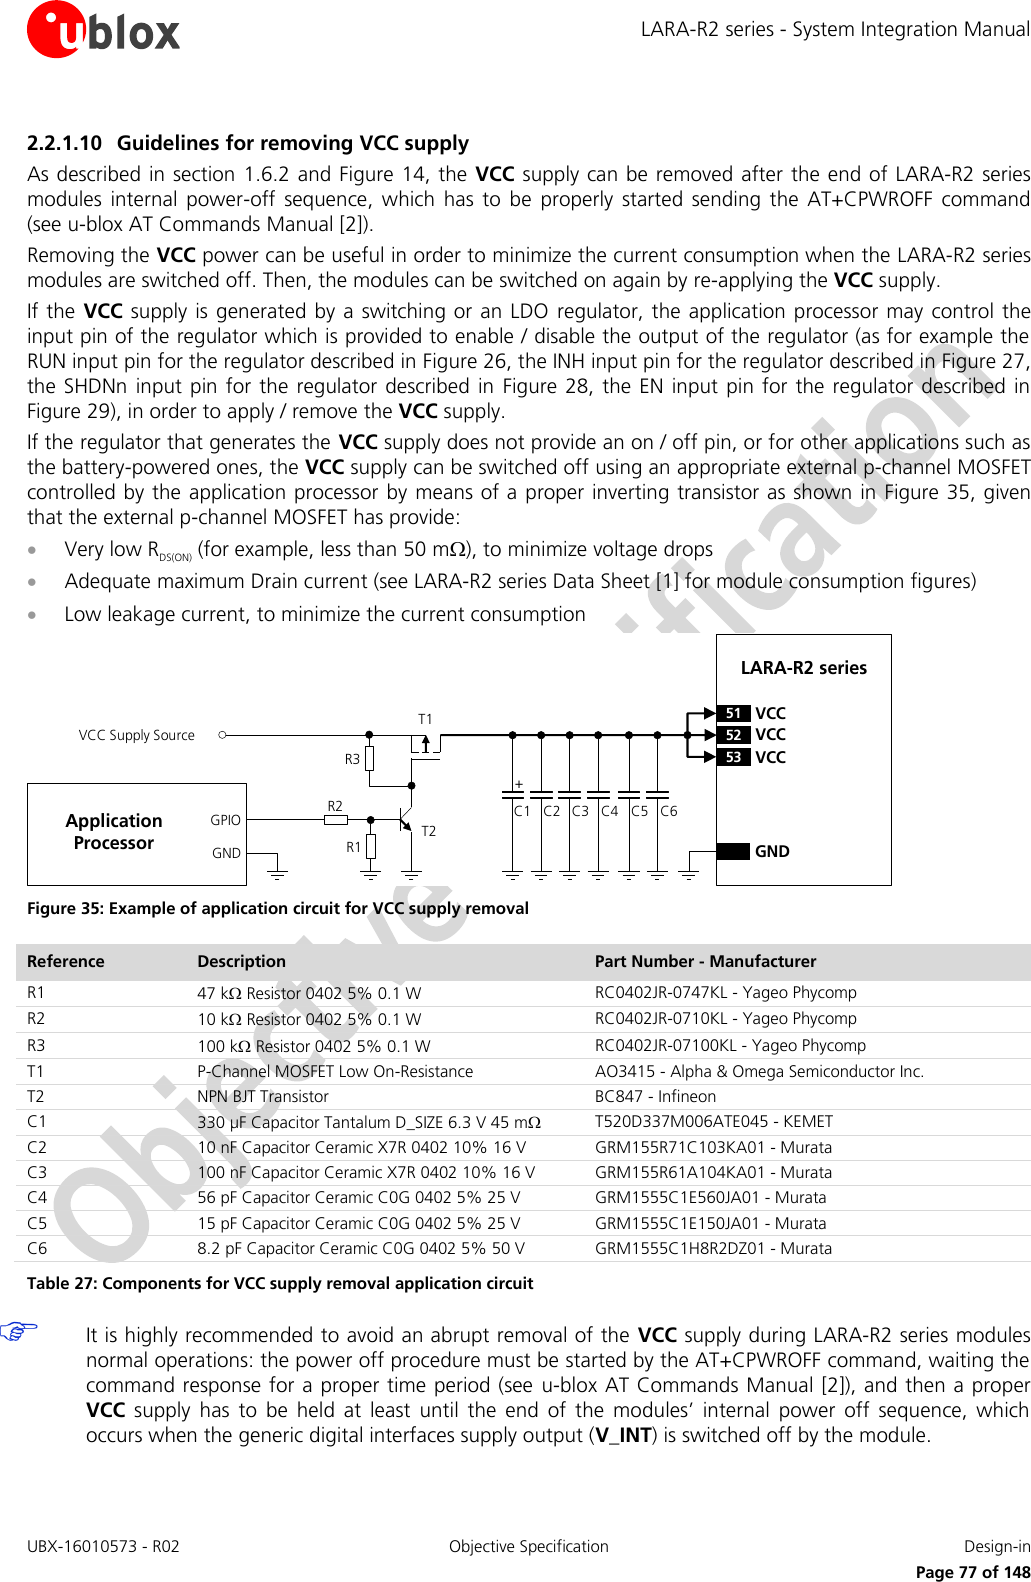 LARA-R2 series - System Integration Manual UBX-16010573 - R02  Objective Specification  Design-in     Page 77 of 148 2.2.1.10 Guidelines for removing VCC supply As described in section 1.6.2 and Figure 14, the VCC supply can be removed after the end of LARA-R2 series modules  internal  power-off  sequence,  which  has  to  be  properly  started  sending  the  AT+CPWROFF  command (see u-blox AT Commands Manual [2]).  Removing the VCC power can be useful in order to minimize the current consumption when the LARA-R2 series modules are switched off. Then, the modules can be switched on again by re-applying the VCC supply. If the VCC  supply  is generated by a switching or  an  LDO  regulator, the application  processor may  control  the input pin of the regulator which is provided to enable / disable the output of the regulator (as for example the RUN input pin for the regulator described in Figure 26, the INH input pin for the regulator described in Figure 27, the SHDNn  input  pin  for the  regulator described  in  Figure 28,  the EN  input pin  for the regulator  described  in Figure 29), in order to apply / remove the VCC supply. If the regulator that generates the VCC supply does not provide an on / off pin, or for other applications such as the battery-powered ones, the VCC supply can be switched off using an appropriate external p-channel MOSFET controlled by the  application processor  by  means of a proper inverting transistor as shown in Figure 35, given that the external p-channel MOSFET has provide:  Very low RDS(ON) (for example, less than 50 m), to minimize voltage drops   Adequate maximum Drain current (see LARA-R2 series Data Sheet [1] for module consumption figures)  Low leakage current, to minimize the current consumption C3GNDC2C1 C4LARA-R2 series52 VCC53 VCC51 VCC+VCC Supply SourceGNDGPIO C5 C6R1R3R2T2T1Application Processor Figure 35: Example of application circuit for VCC supply removal Reference Description Part Number - Manufacturer R1 47 k Resistor 0402 5% 0.1 W  RC0402JR-0747KL - Yageo Phycomp R2 10 k Resistor 0402 5% 0.1 W  RC0402JR-0710KL - Yageo Phycomp R3 100 k Resistor 0402 5% 0.1 W  RC0402JR-07100KL - Yageo Phycomp T1 P-Channel MOSFET Low On-Resistance AO3415 - Alpha &amp; Omega Semiconductor Inc.  T2 NPN BJT Transistor BC847 - Infineon C1 330 µF Capacitor Tantalum D_SIZE 6.3 V 45 m T520D337M006ATE045 - KEMET C2 10 nF Capacitor Ceramic X7R 0402 10% 16 V GRM155R71C103KA01 - Murata C3 100 nF Capacitor Ceramic X7R 0402 10% 16 V GRM155R61A104KA01 - Murata C4 56 pF Capacitor Ceramic C0G 0402 5% 25 V GRM1555C1E560JA01 - Murata C5 15 pF Capacitor Ceramic C0G 0402 5% 25 V  GRM1555C1E150JA01 - Murata C6 8.2 pF Capacitor Ceramic C0G 0402 5% 50 V GRM1555C1H8R2DZ01 - Murata Table 27: Components for VCC supply removal application circuit  It is highly recommended to avoid an abrupt removal of the  VCC supply during LARA-R2 series modules normal operations: the power off procedure must be started by the AT+CPWROFF command, waiting the command response for a proper time period (see  u-blox AT Commands Manual [2]), and then a proper VCC supply  has  to  be  held  at  least  until  the  end  of  the  modules’  internal  power  off  sequence,  which occurs when the generic digital interfaces supply output (V_INT) is switched off by the module.  